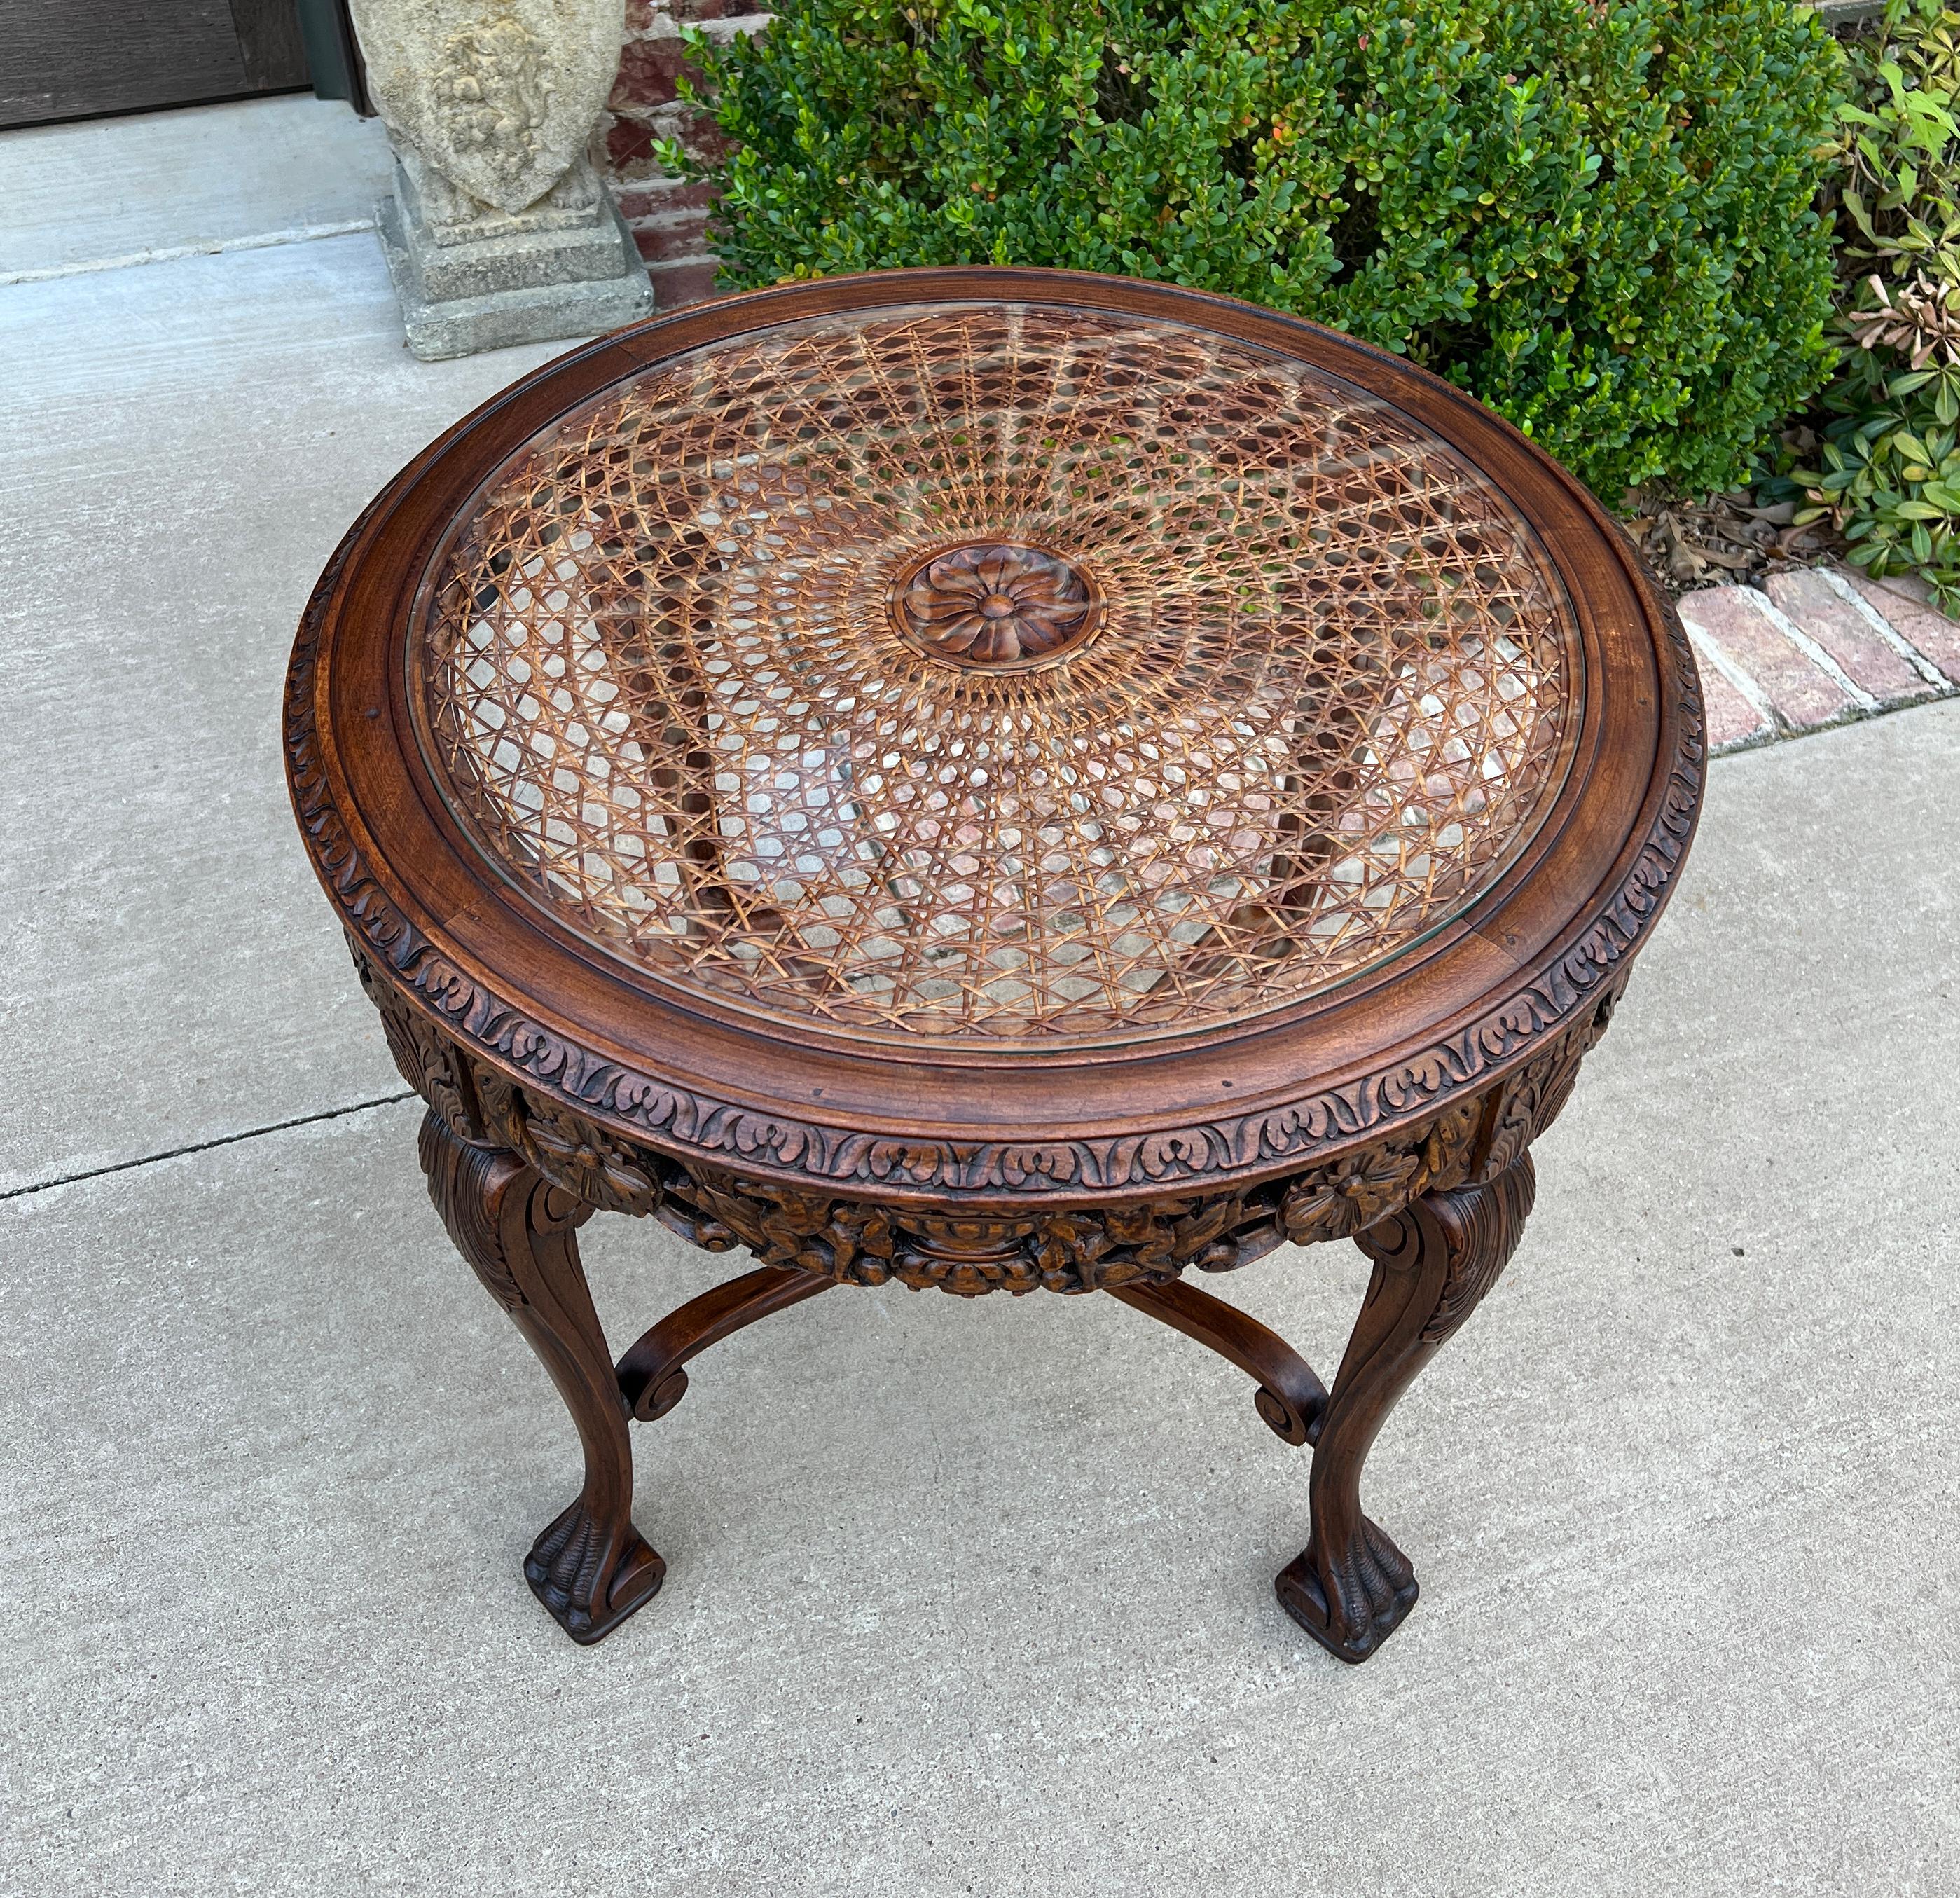 Antique French Round End Table Occasional Bed Table Caned Glass Top Walnut 19c For Sale 5